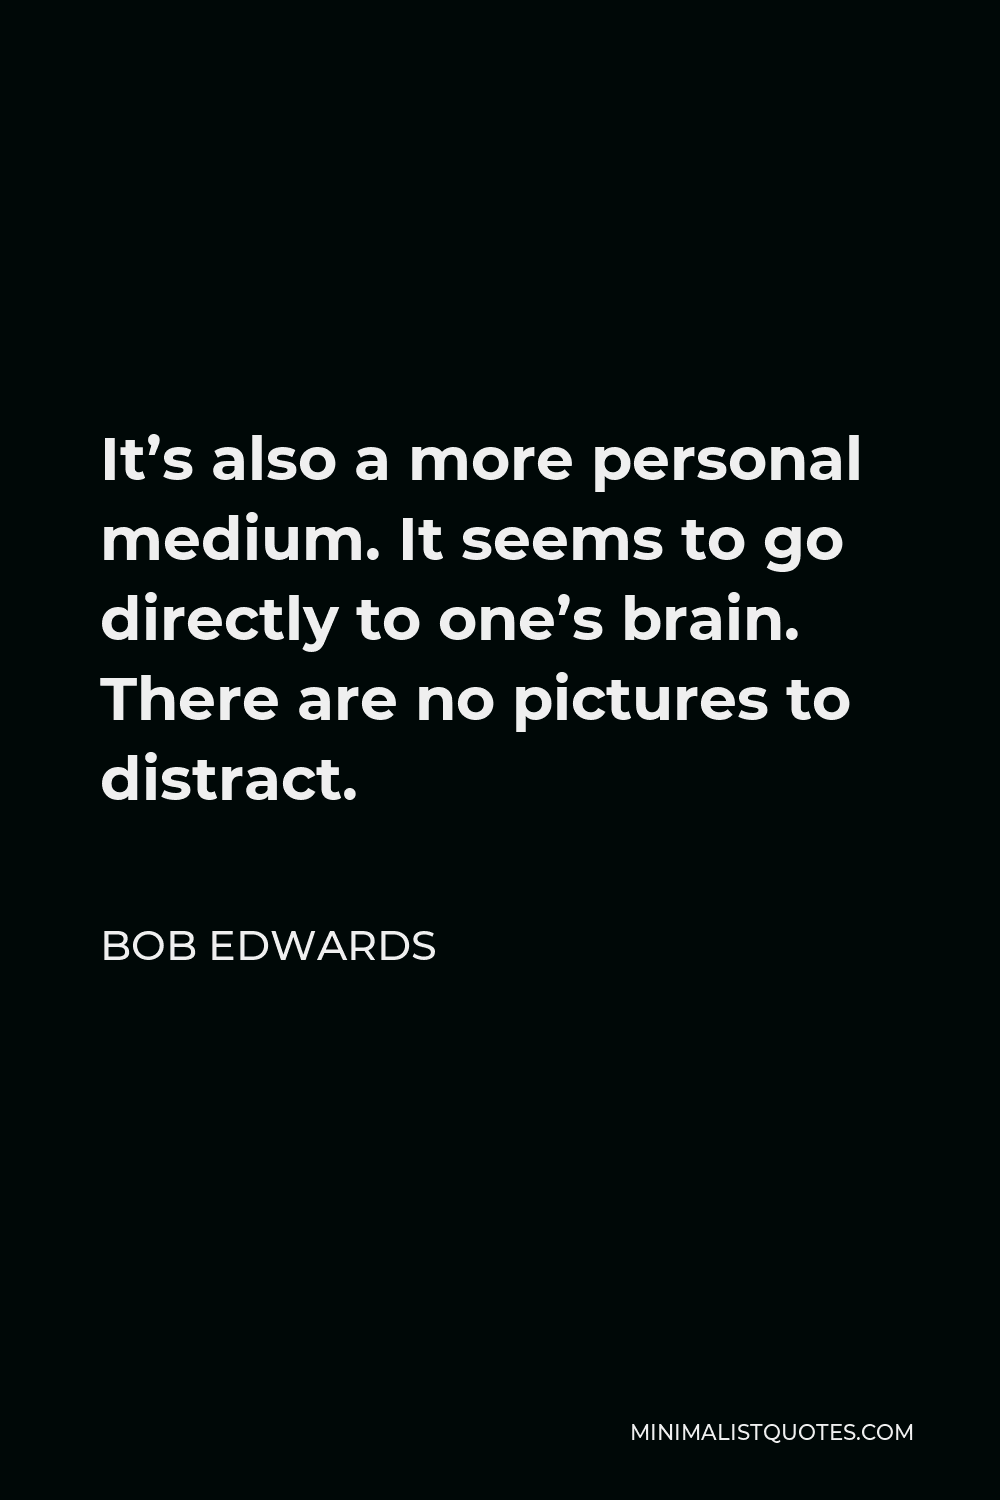 Bob Edwards Quote - It’s also a more personal medium. It seems to go directly to one’s brain. There are no pictures to distract.